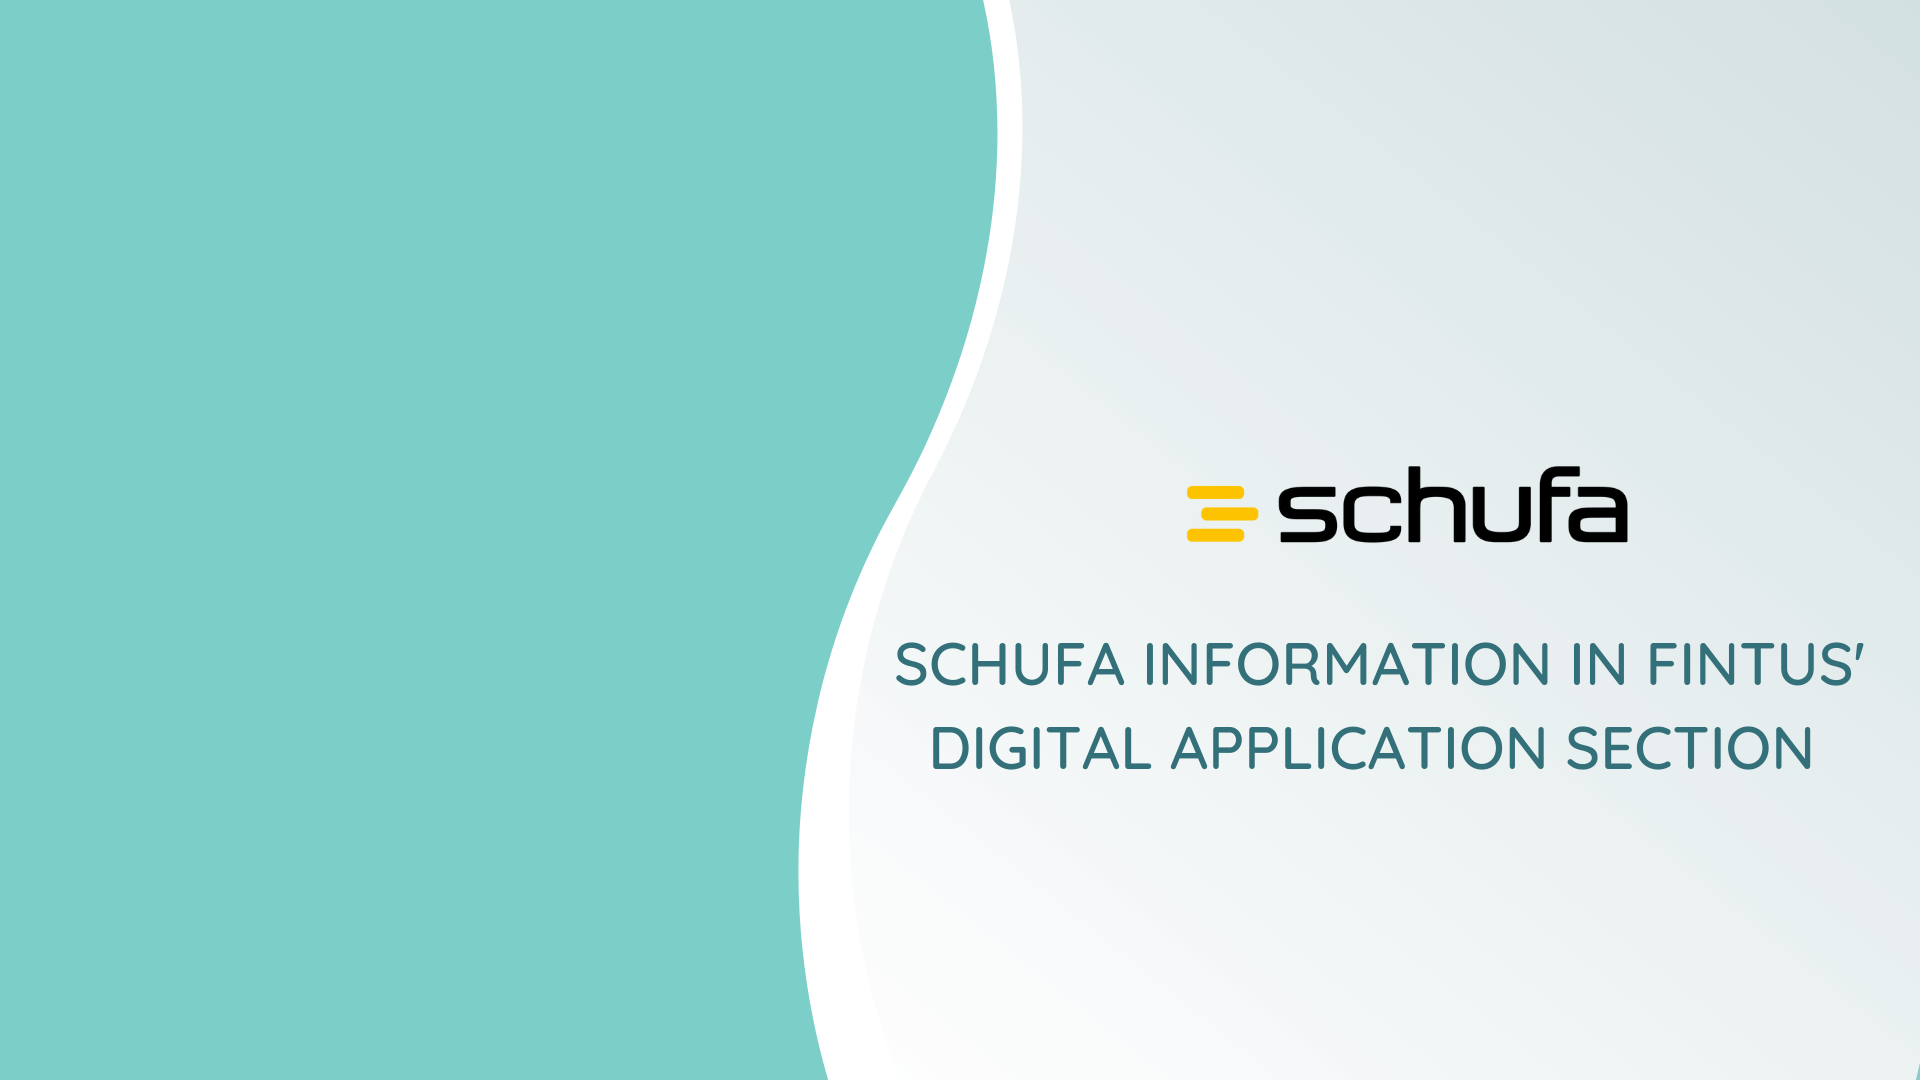 SCHUFA information and score now integrated into fintus Suite